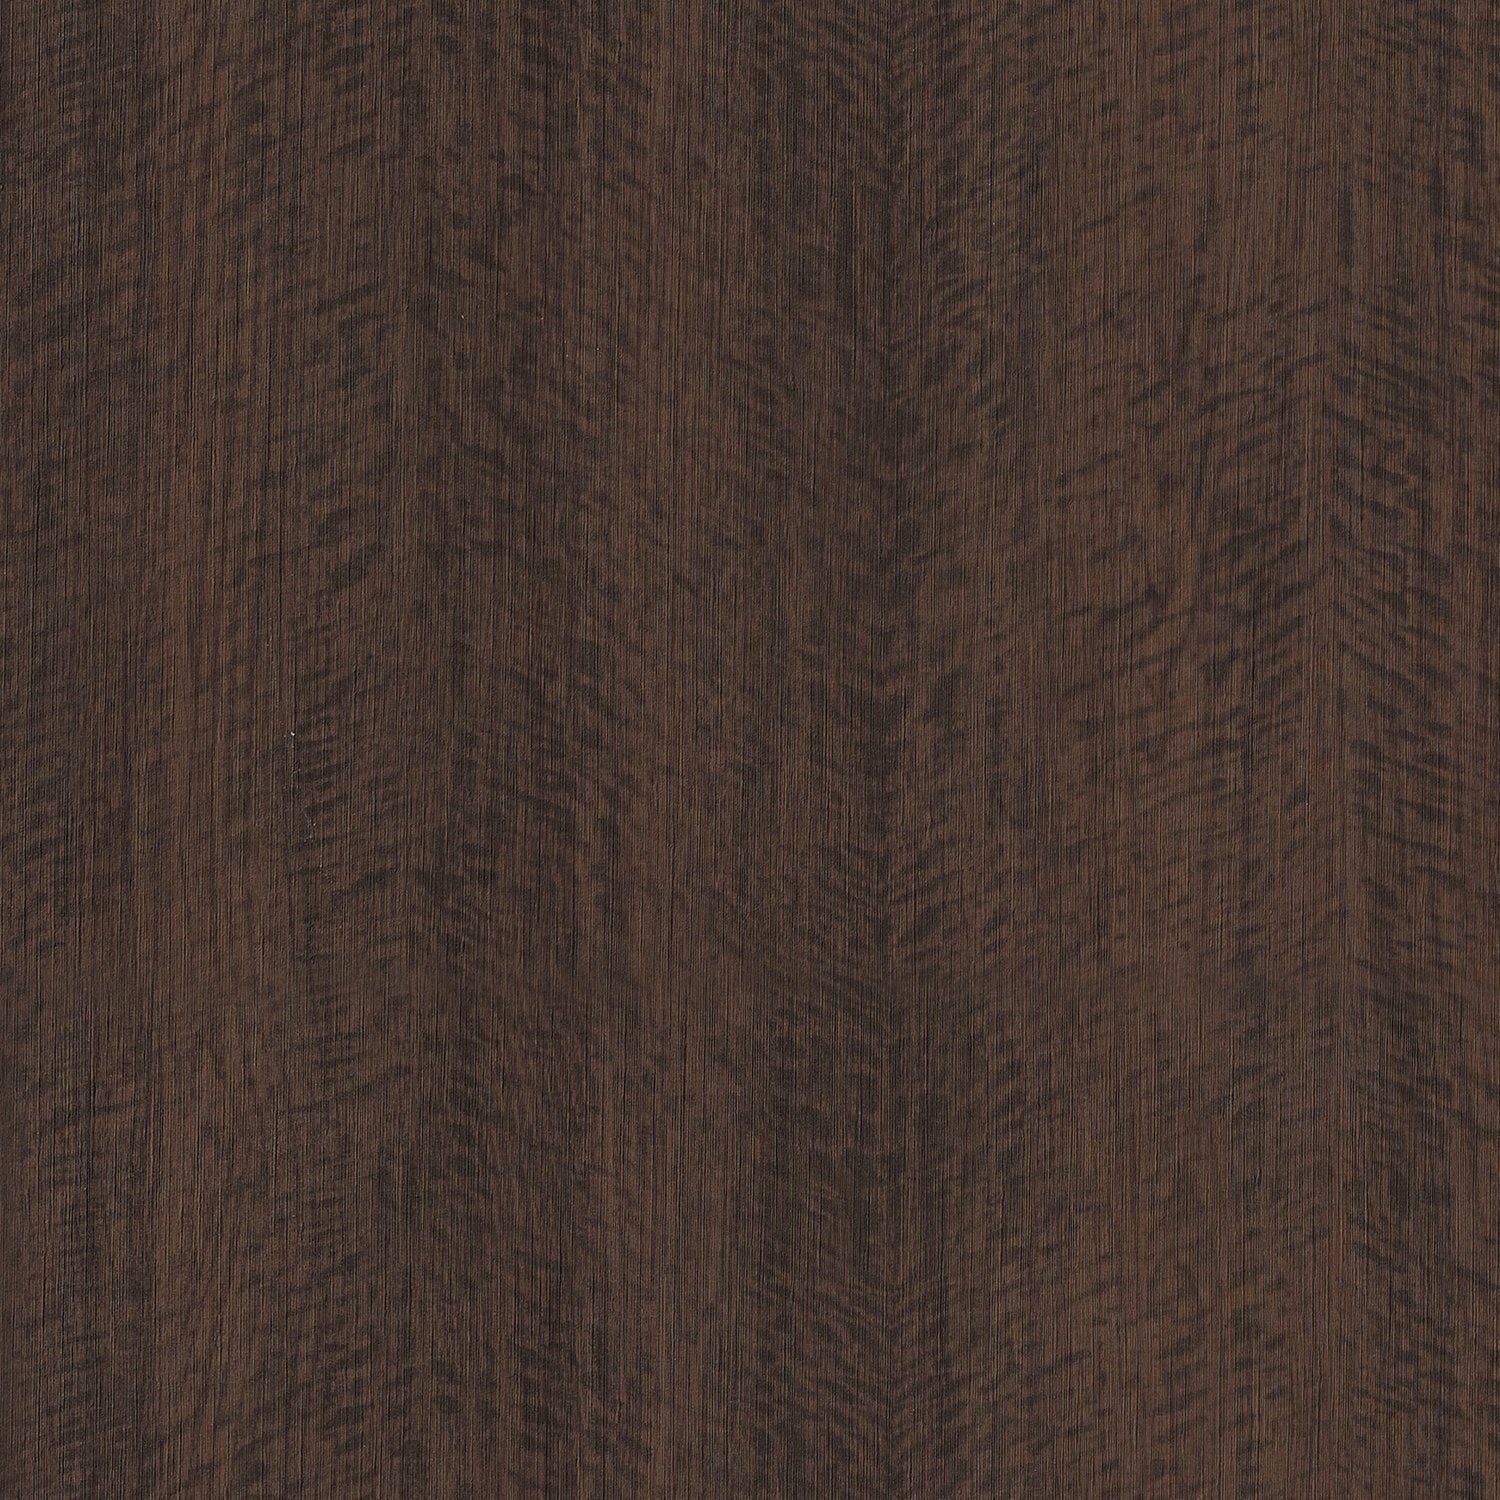 Woodn't It Be Nice - Y47881 - Wallcovering - Vycon - Kube Contract